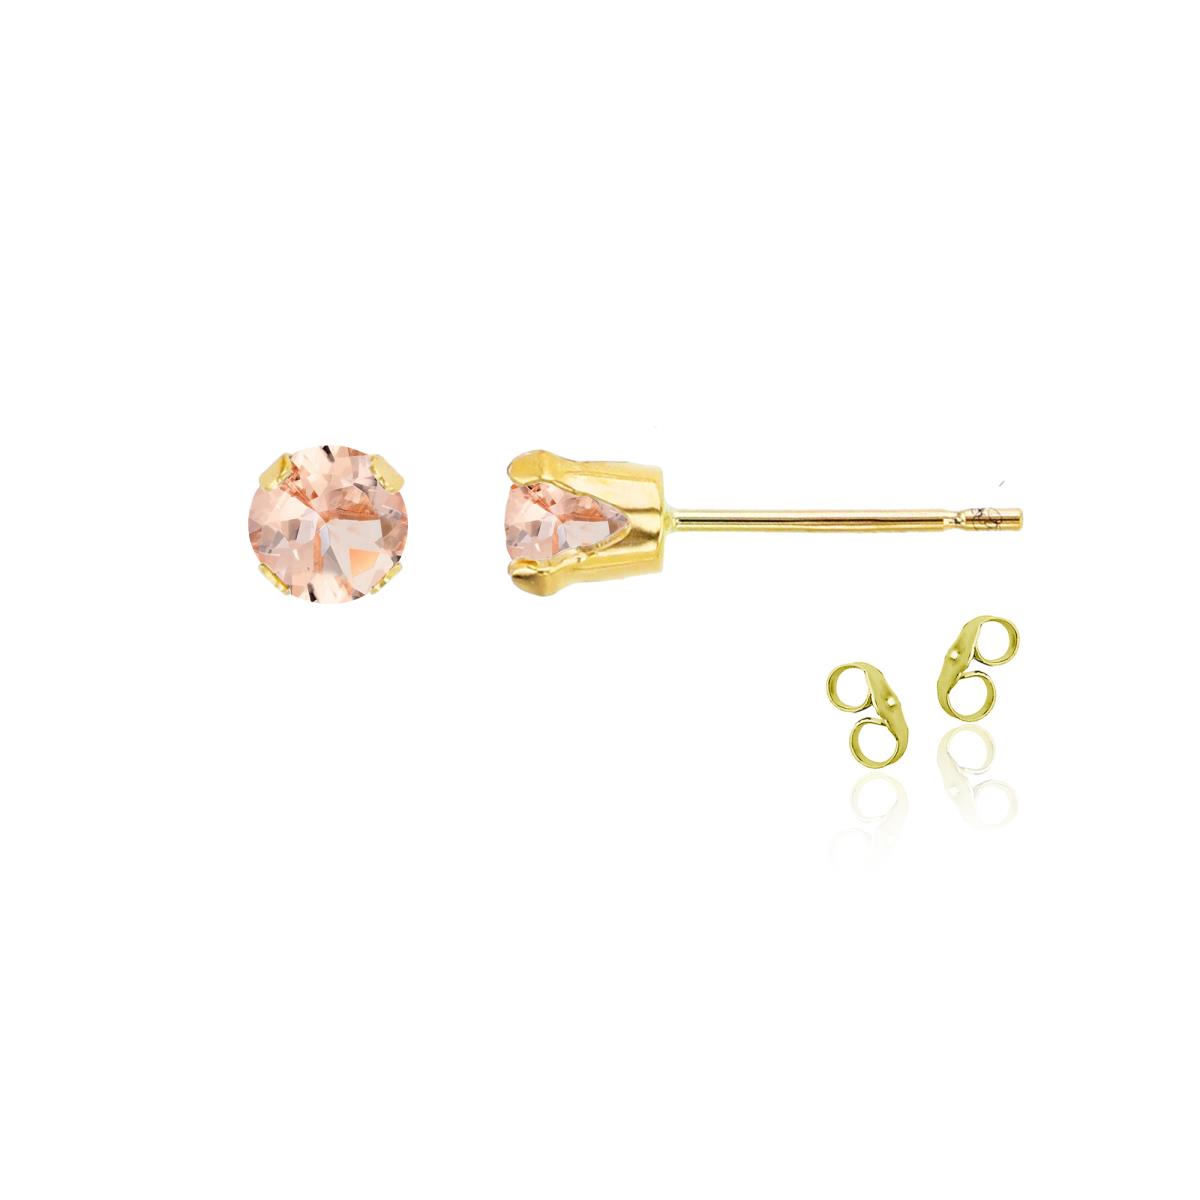 Sterling Silver Yellow 4mm Round Morganite Stud Earring with Clutch